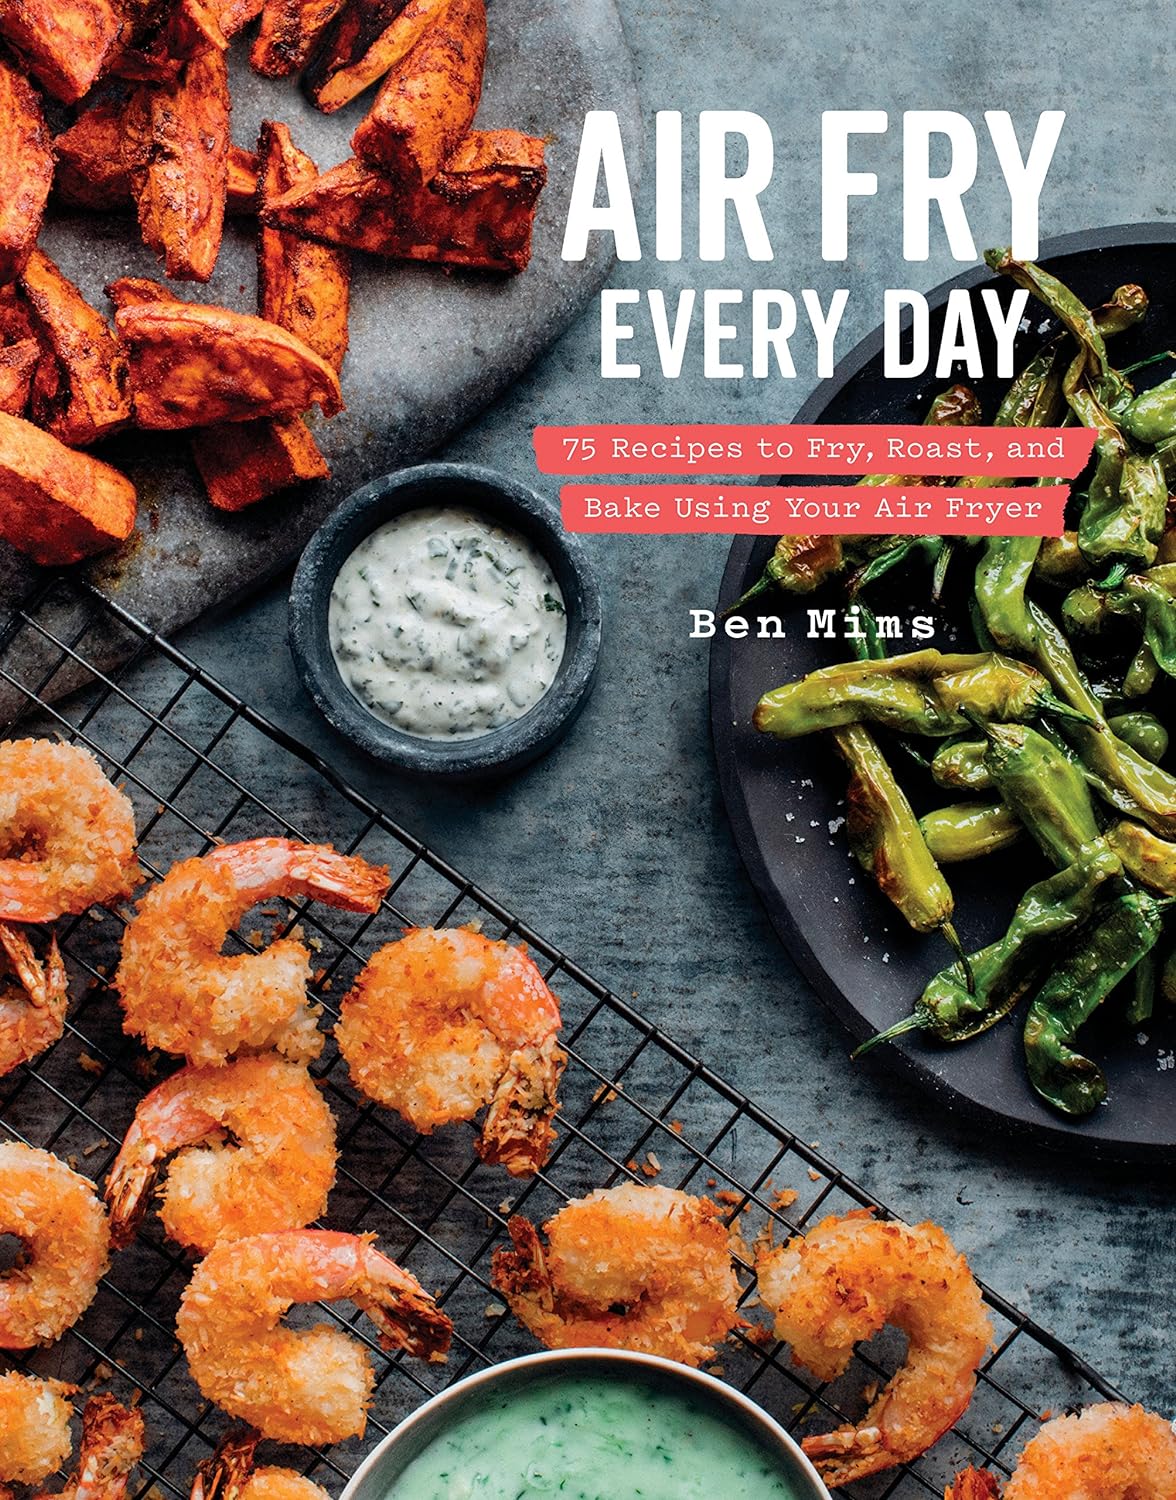 Air Fry Every Day Book